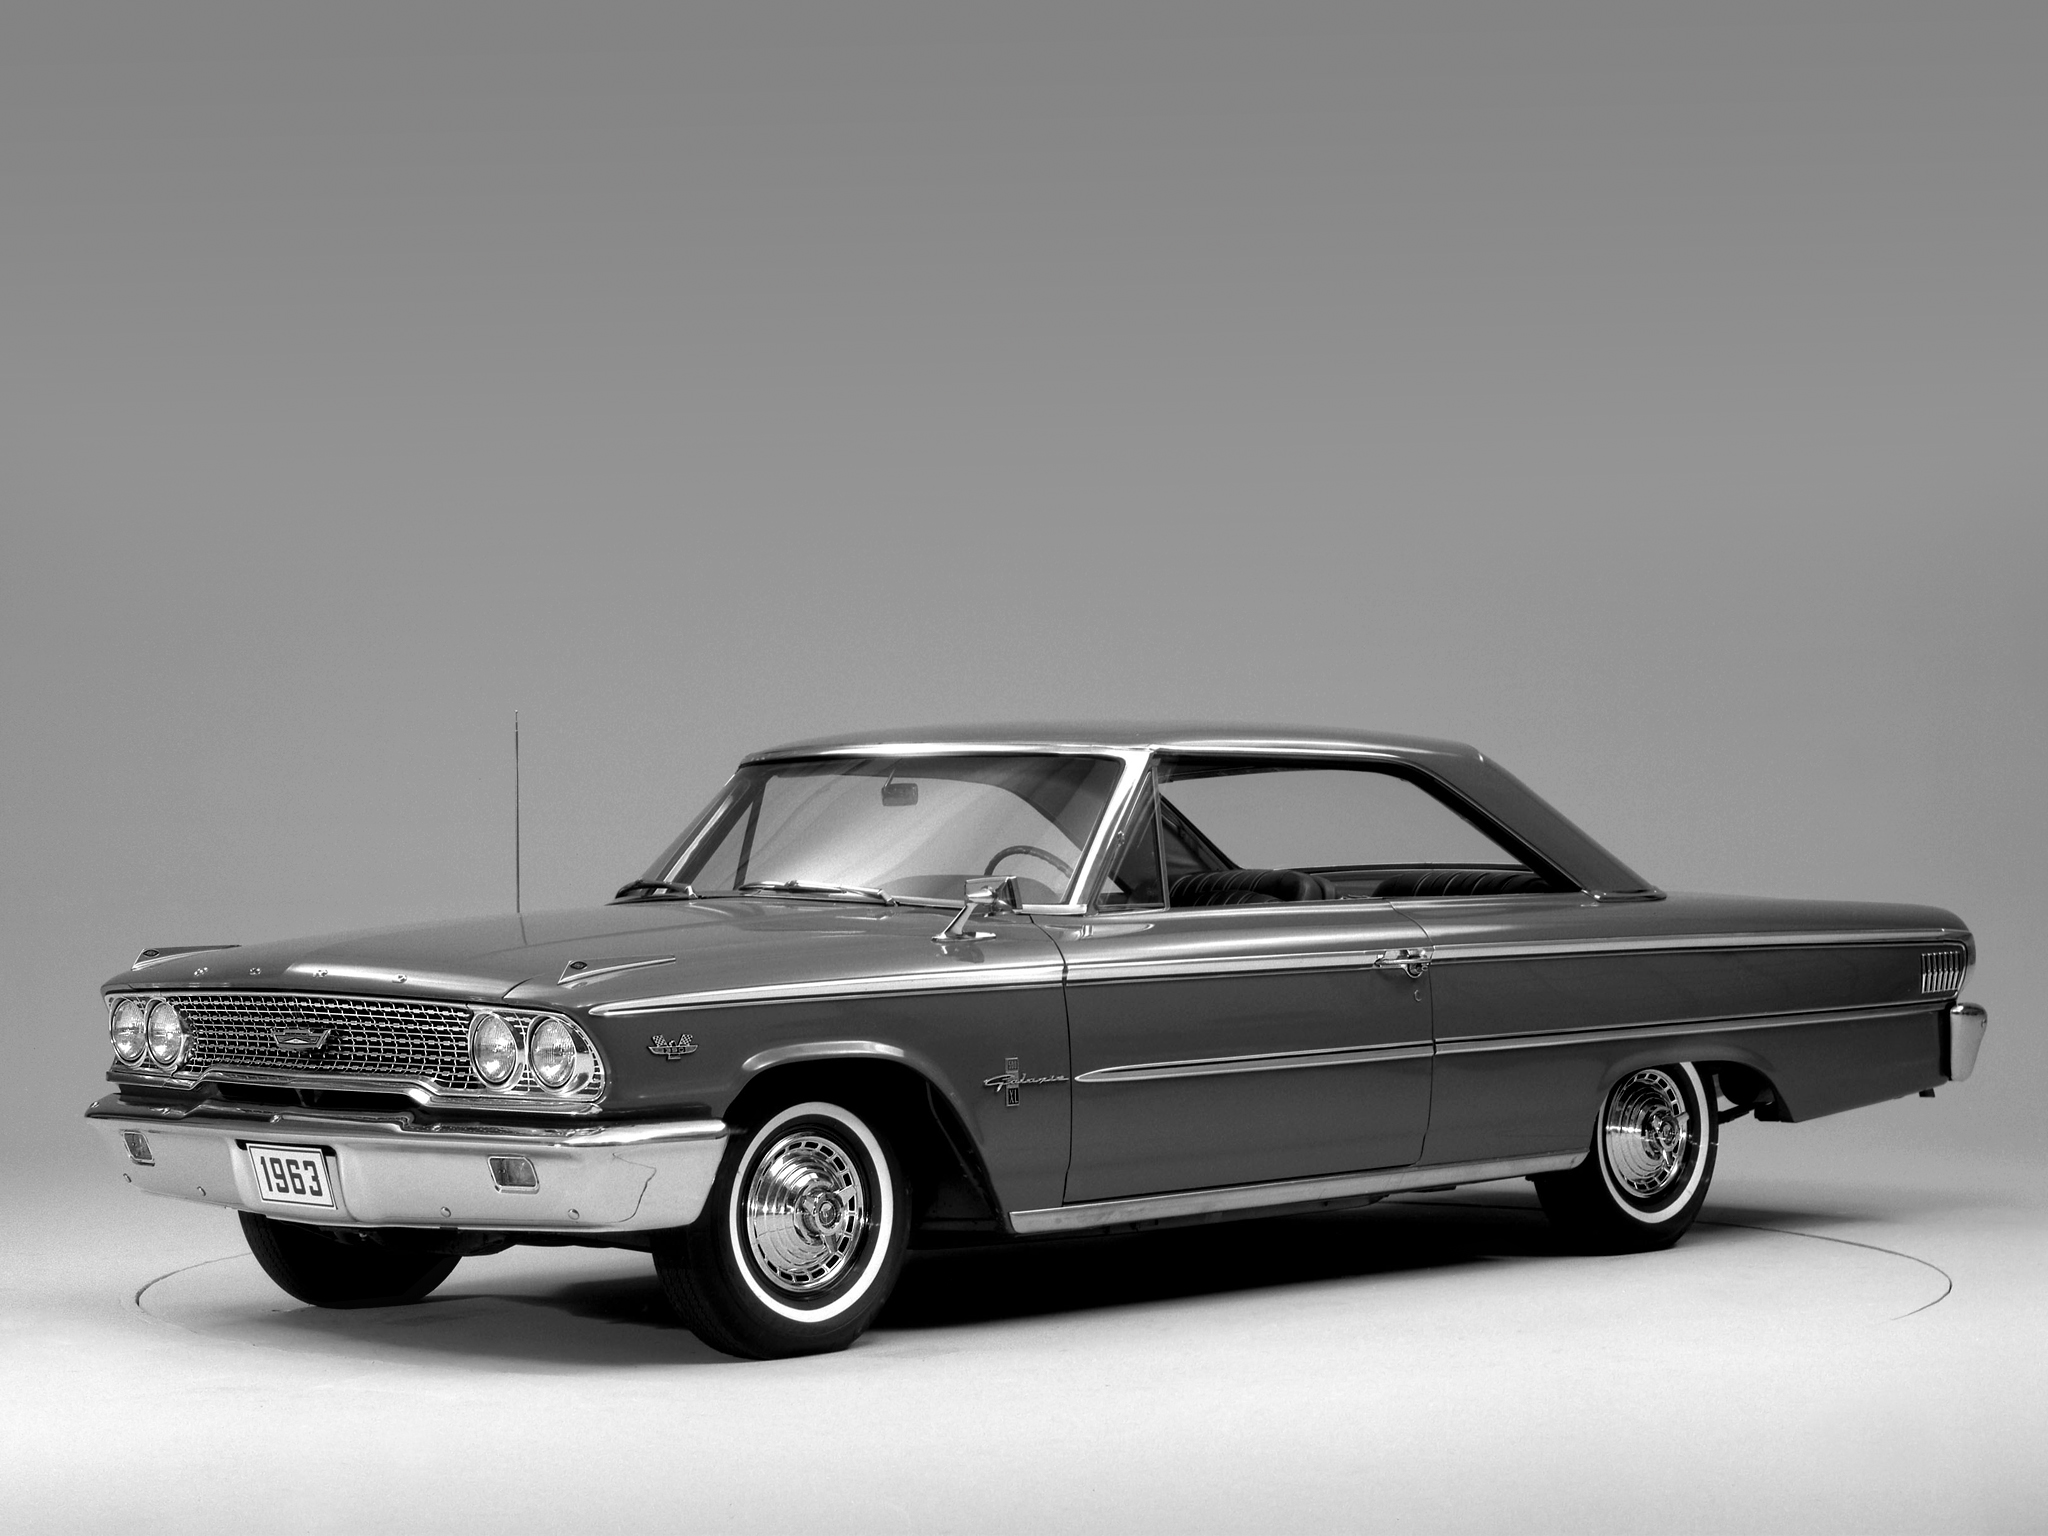 Ford Galaxie X L Hardtop Coupe Classic Wallpaper